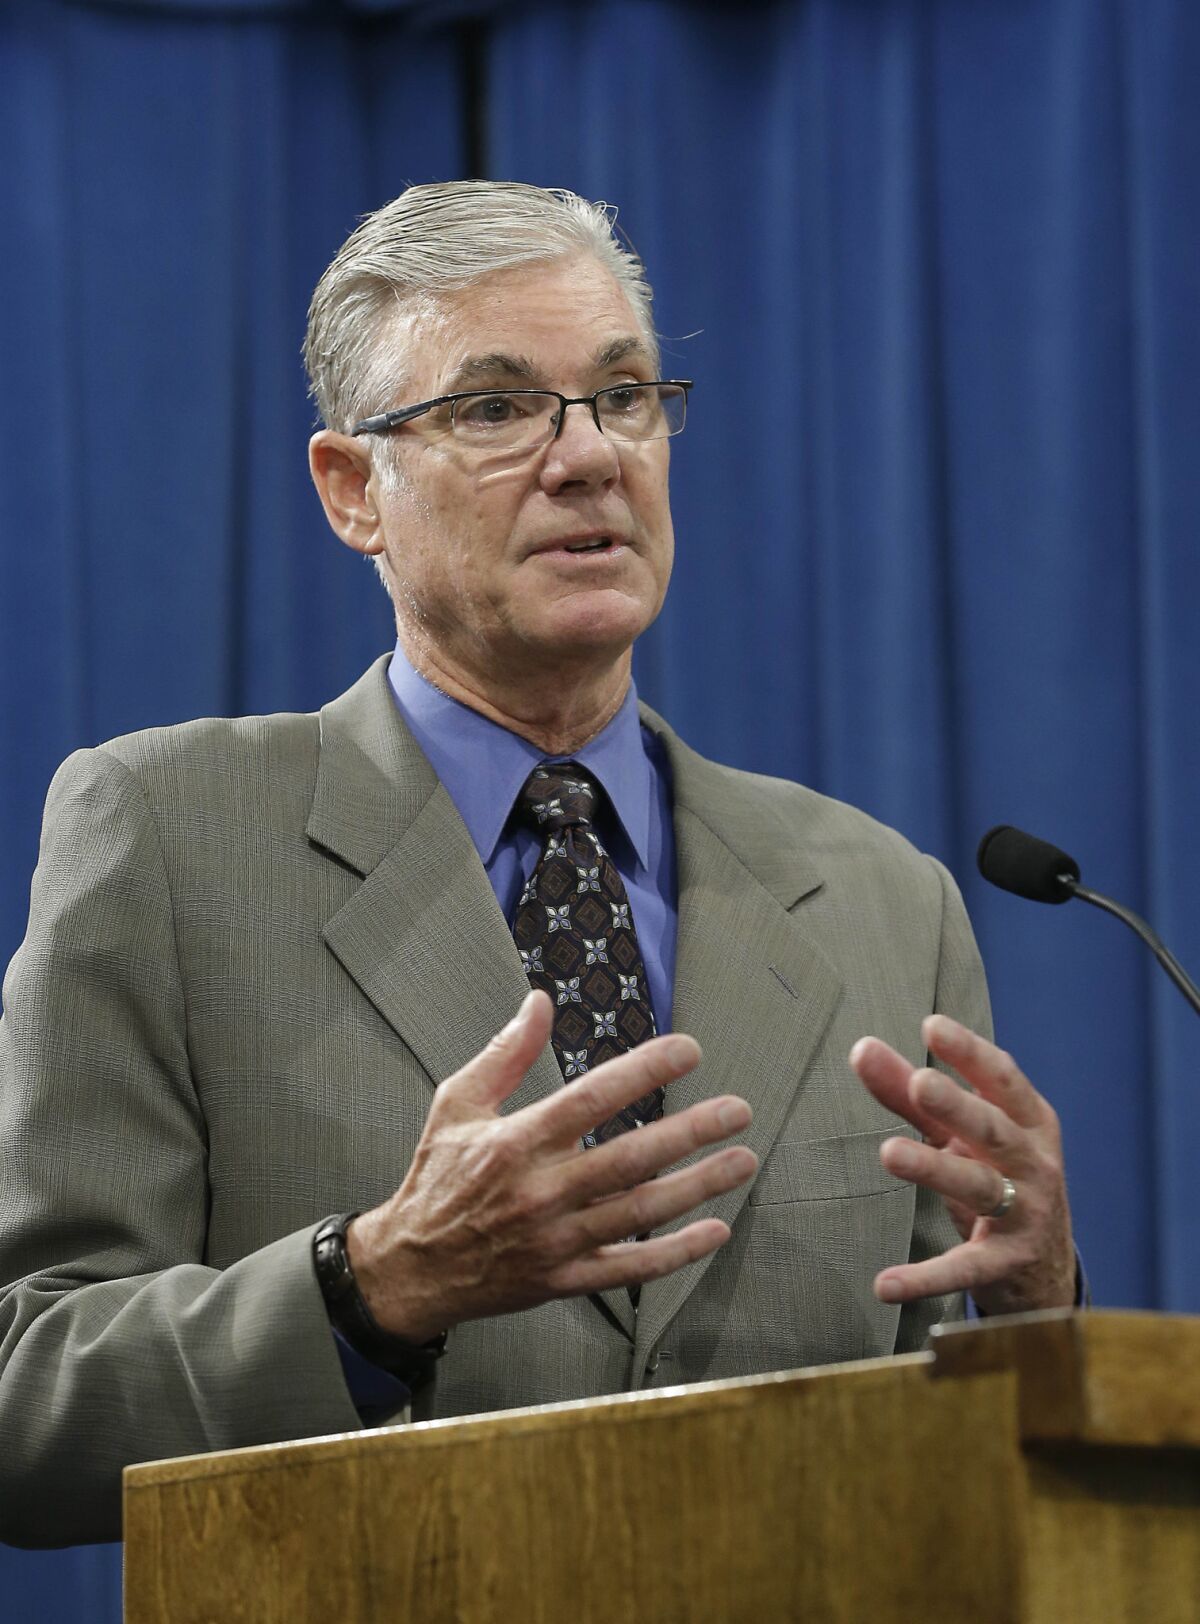 Superintendent of Pubic Education Tom Torlakson won a second term in Tuesday's election.